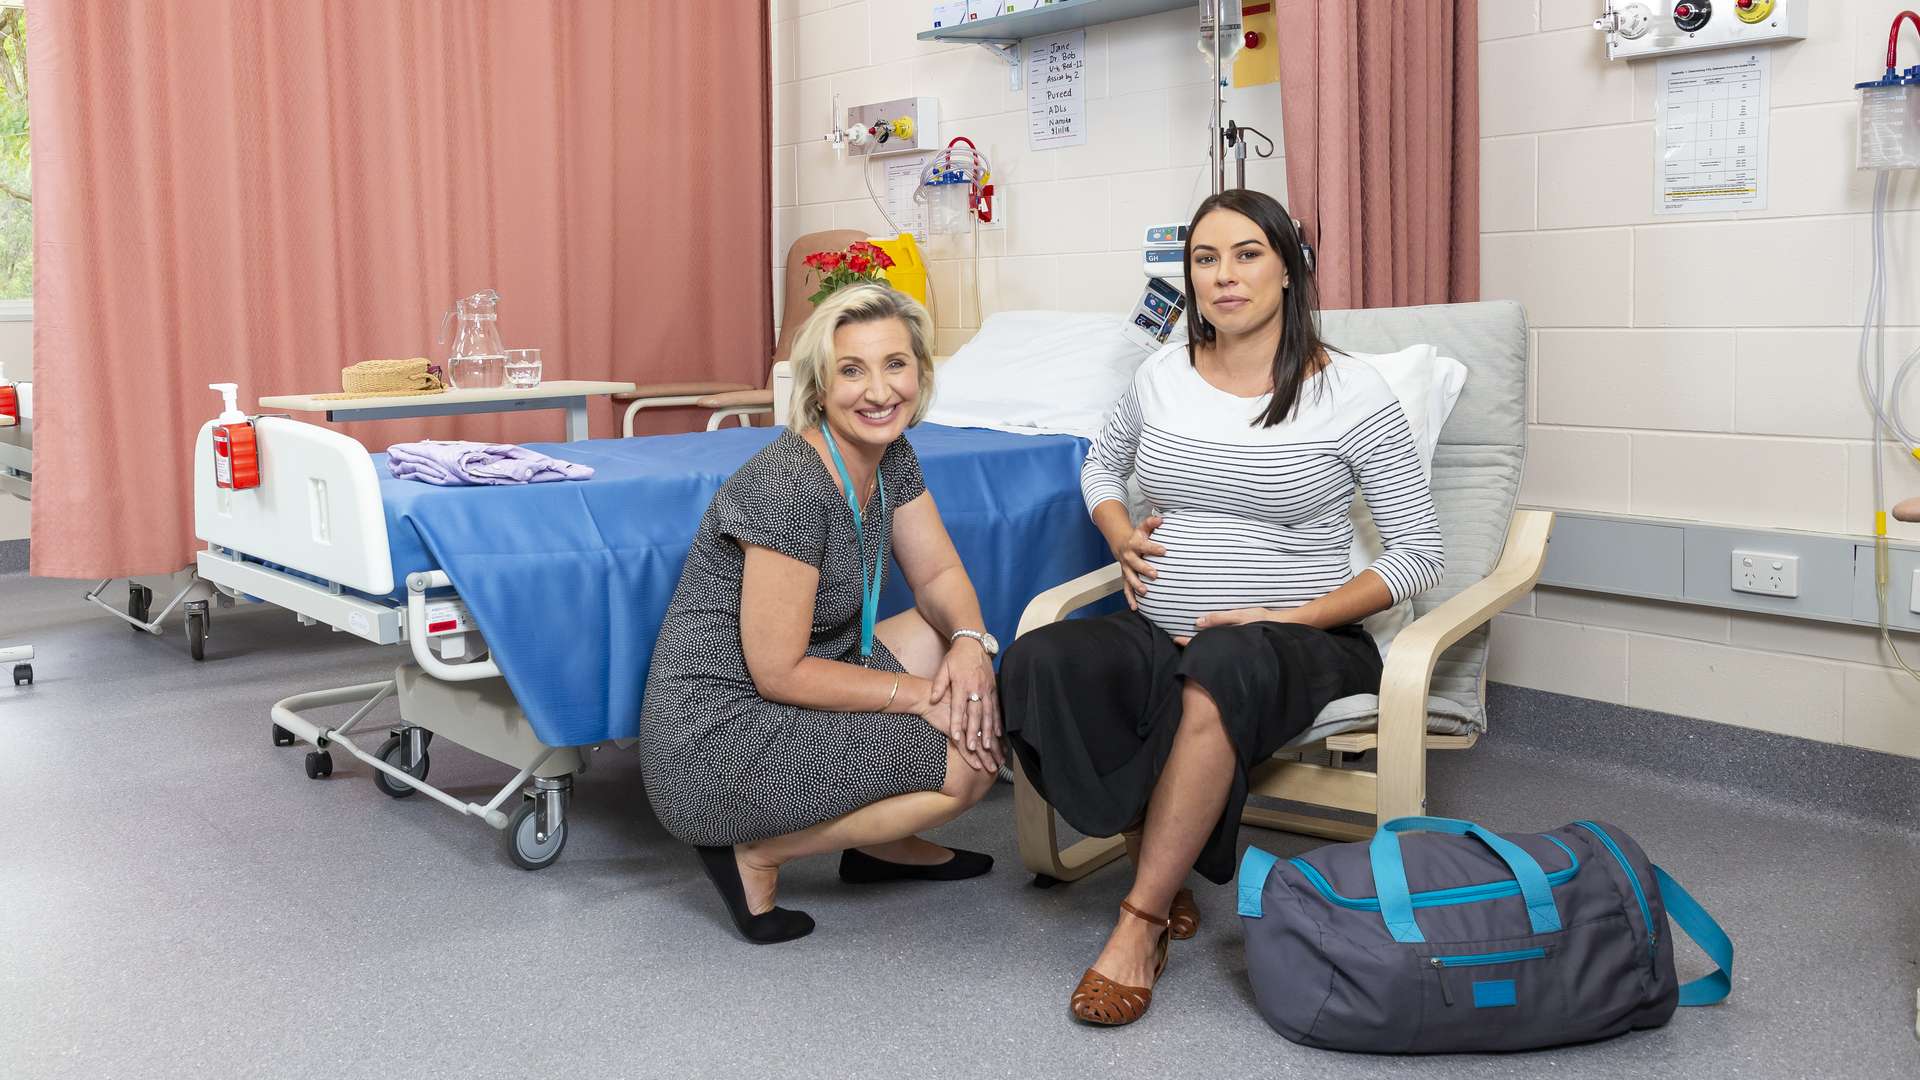 A CQU Midwifery student kneels next to a pregnant woman sitting in a chair in a hospital ward.